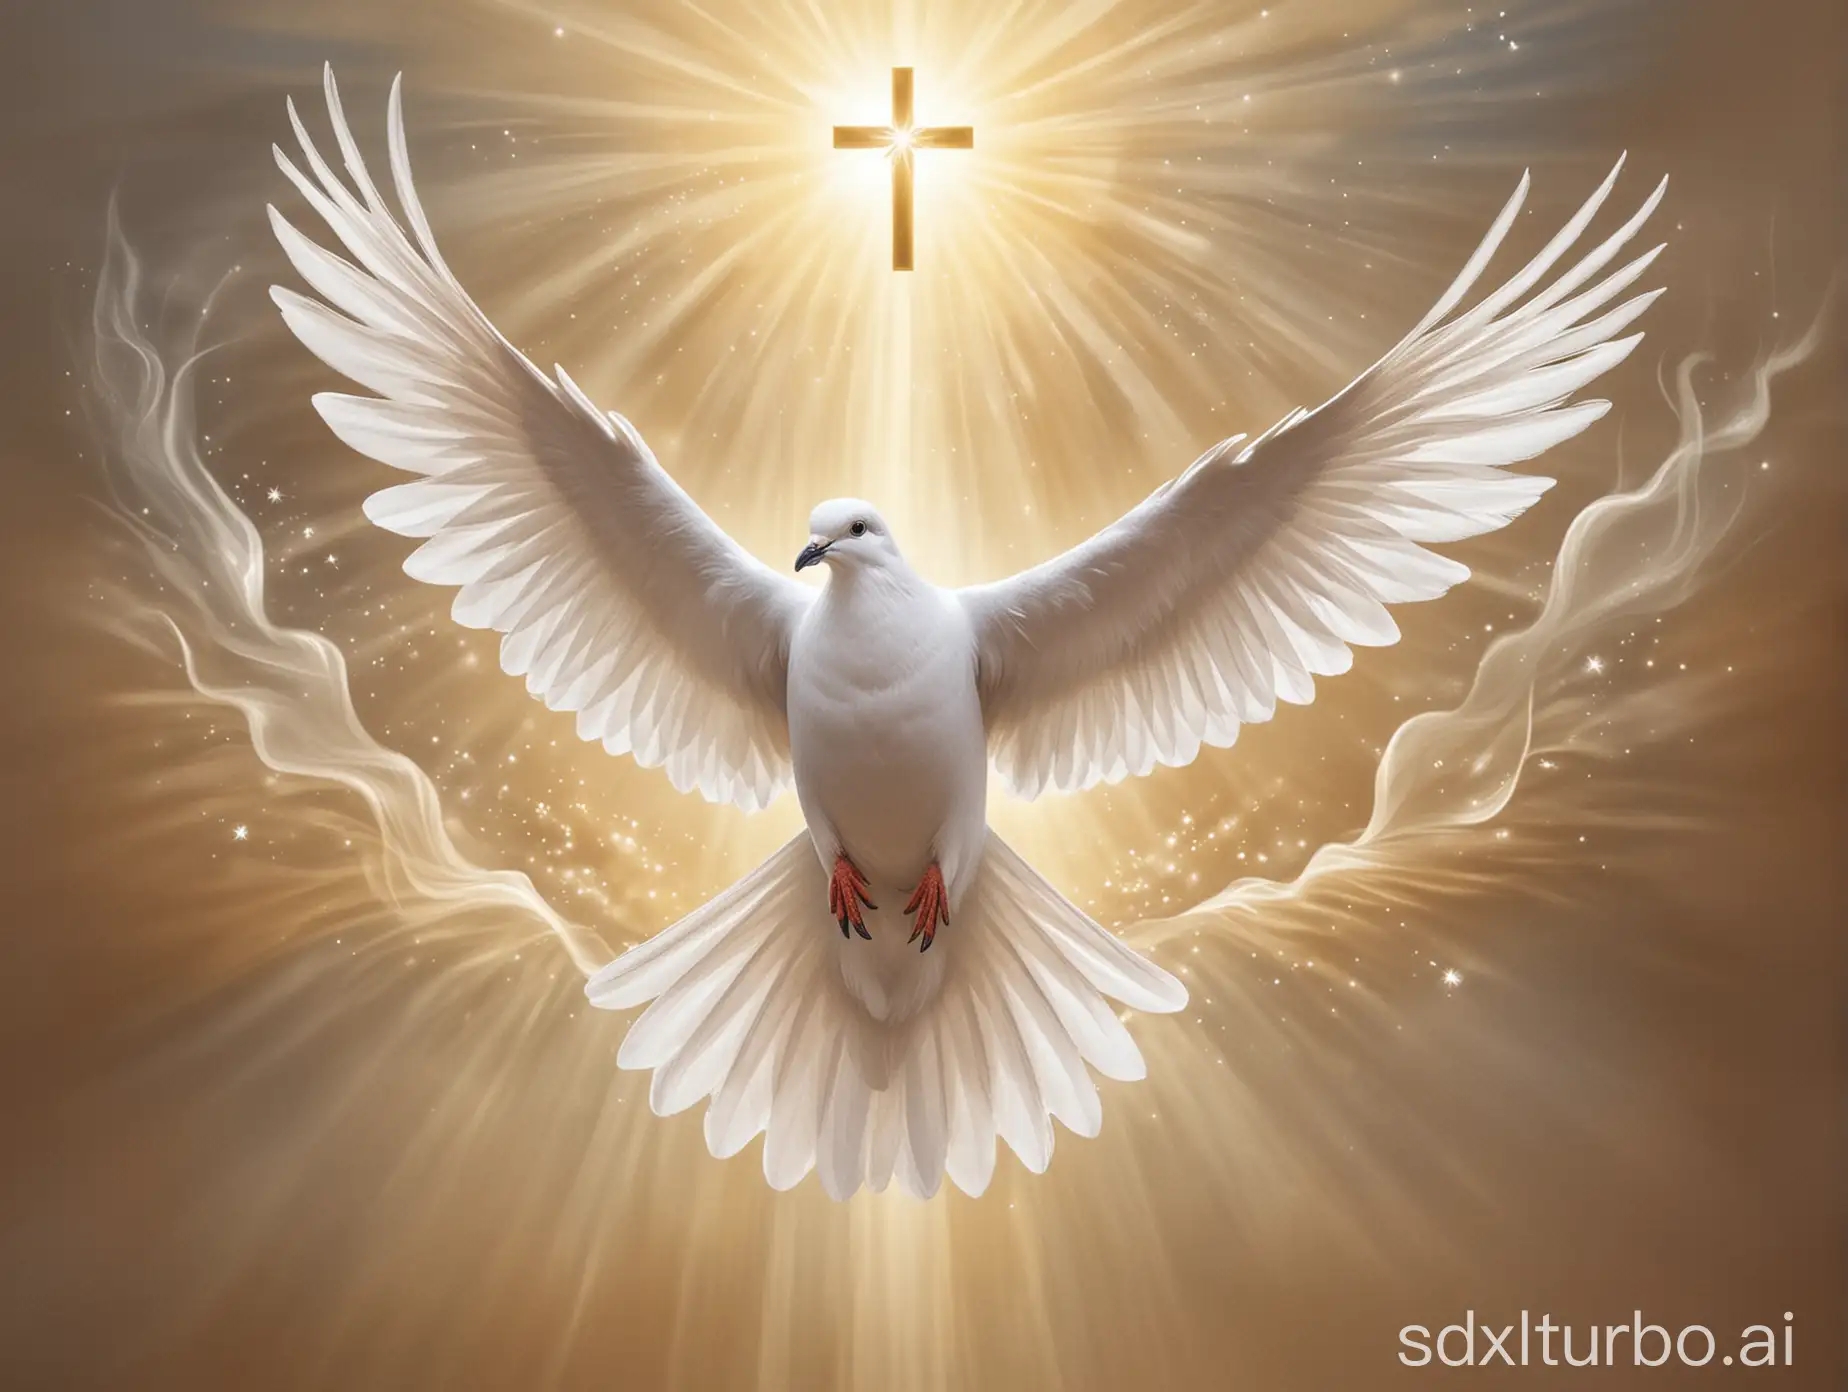 Peaceful-Dove-Spirit-with-Seven-Gifts-of-Confirmation